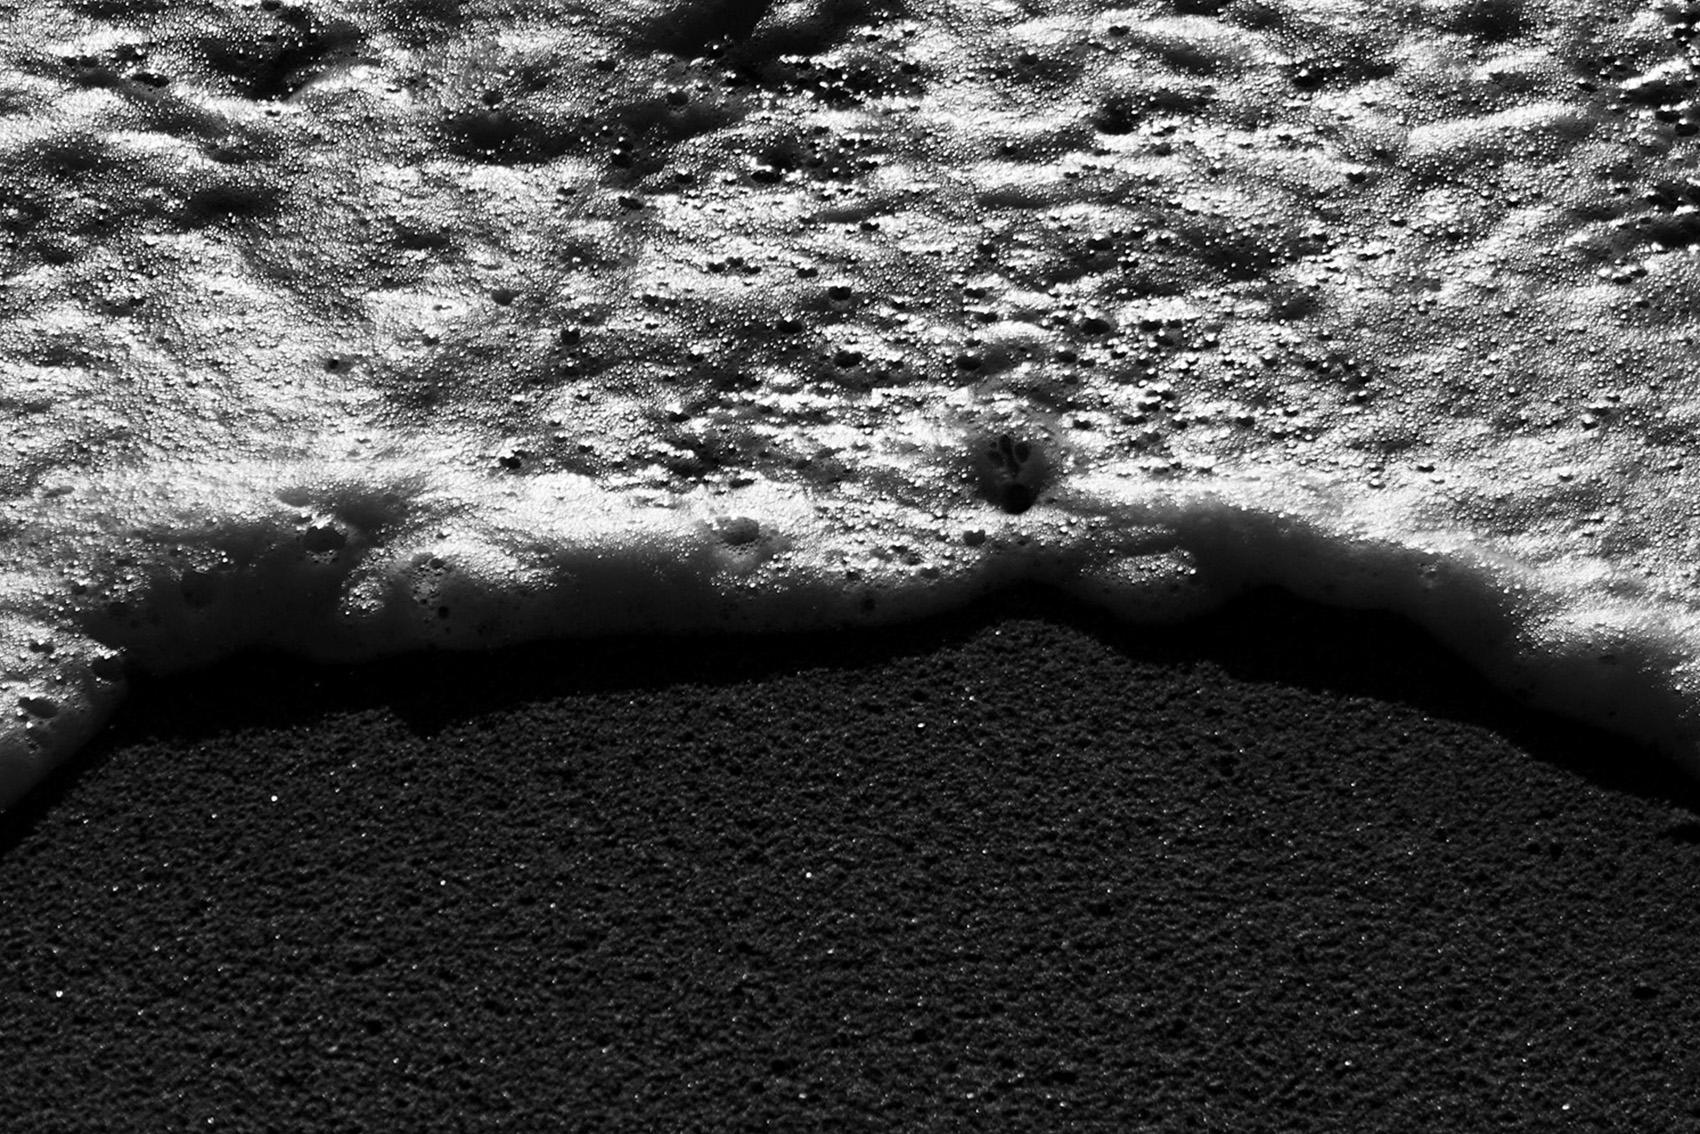 Large Vertical Black and White Seascape of Foamy Shore, Sugimoto Style, Shore - Contemporary Photograph by Kind of Cyan